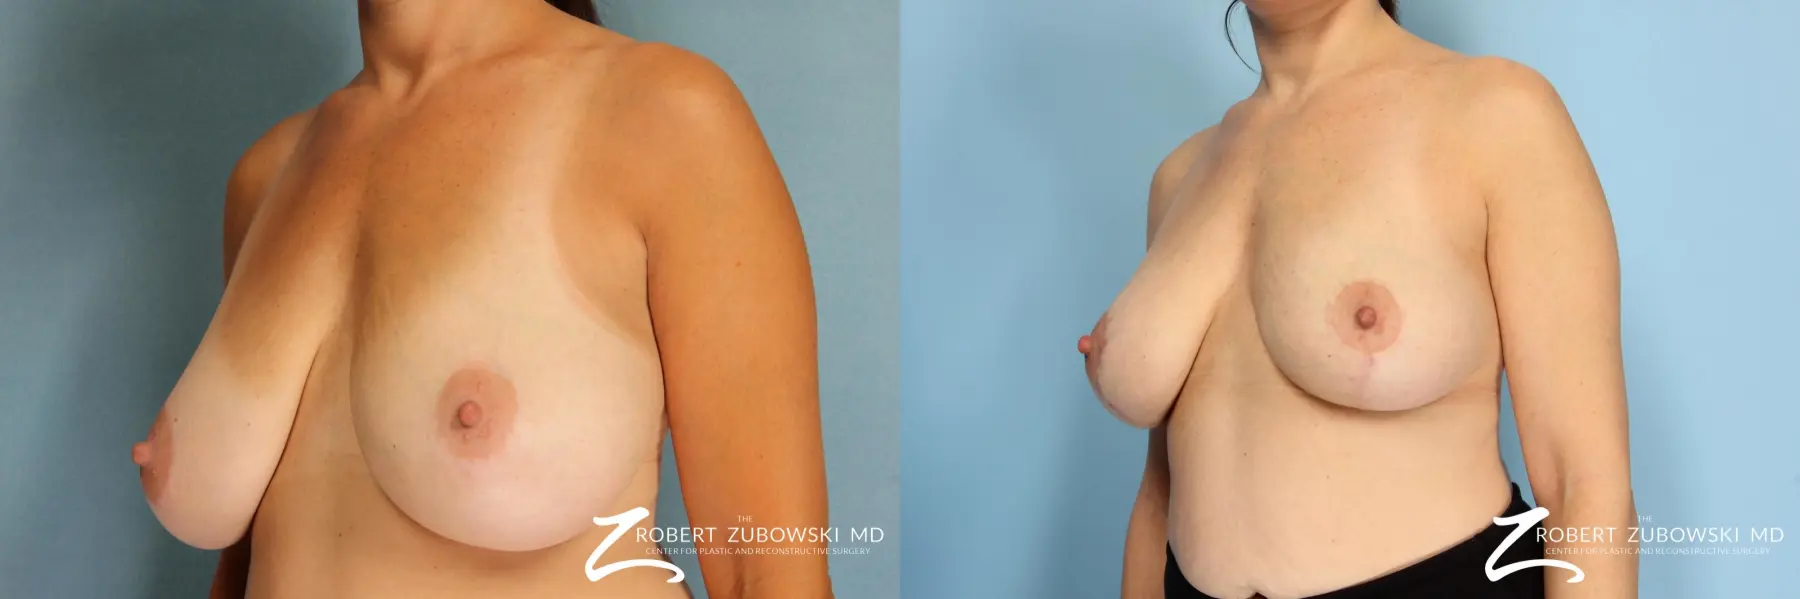 Breast Lift And Augmentation: Patient 8 - Before and After 2